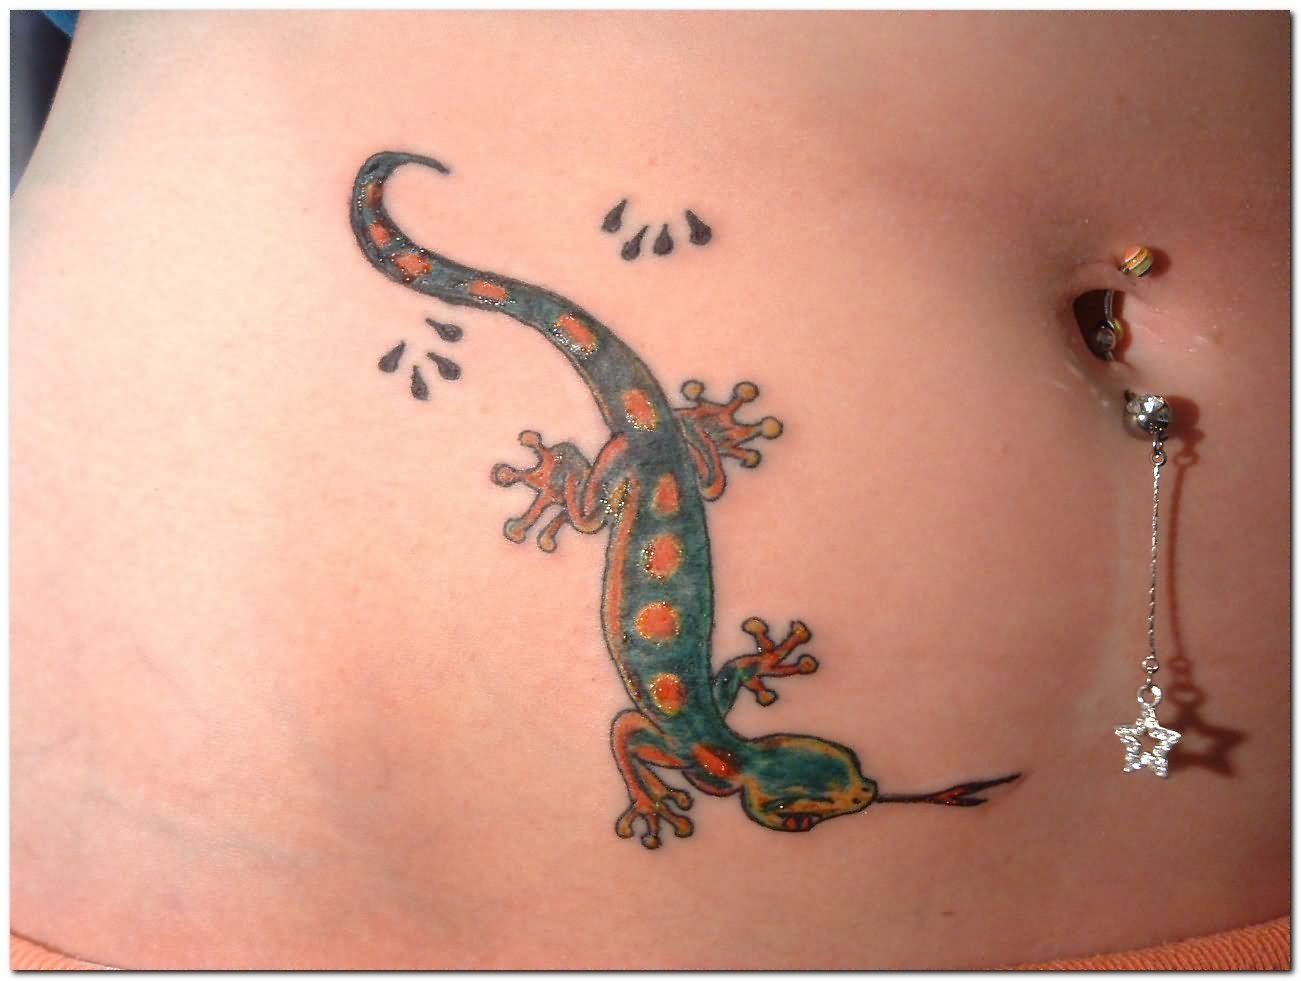 Colorful lizard flicking tongue tattoo on hip